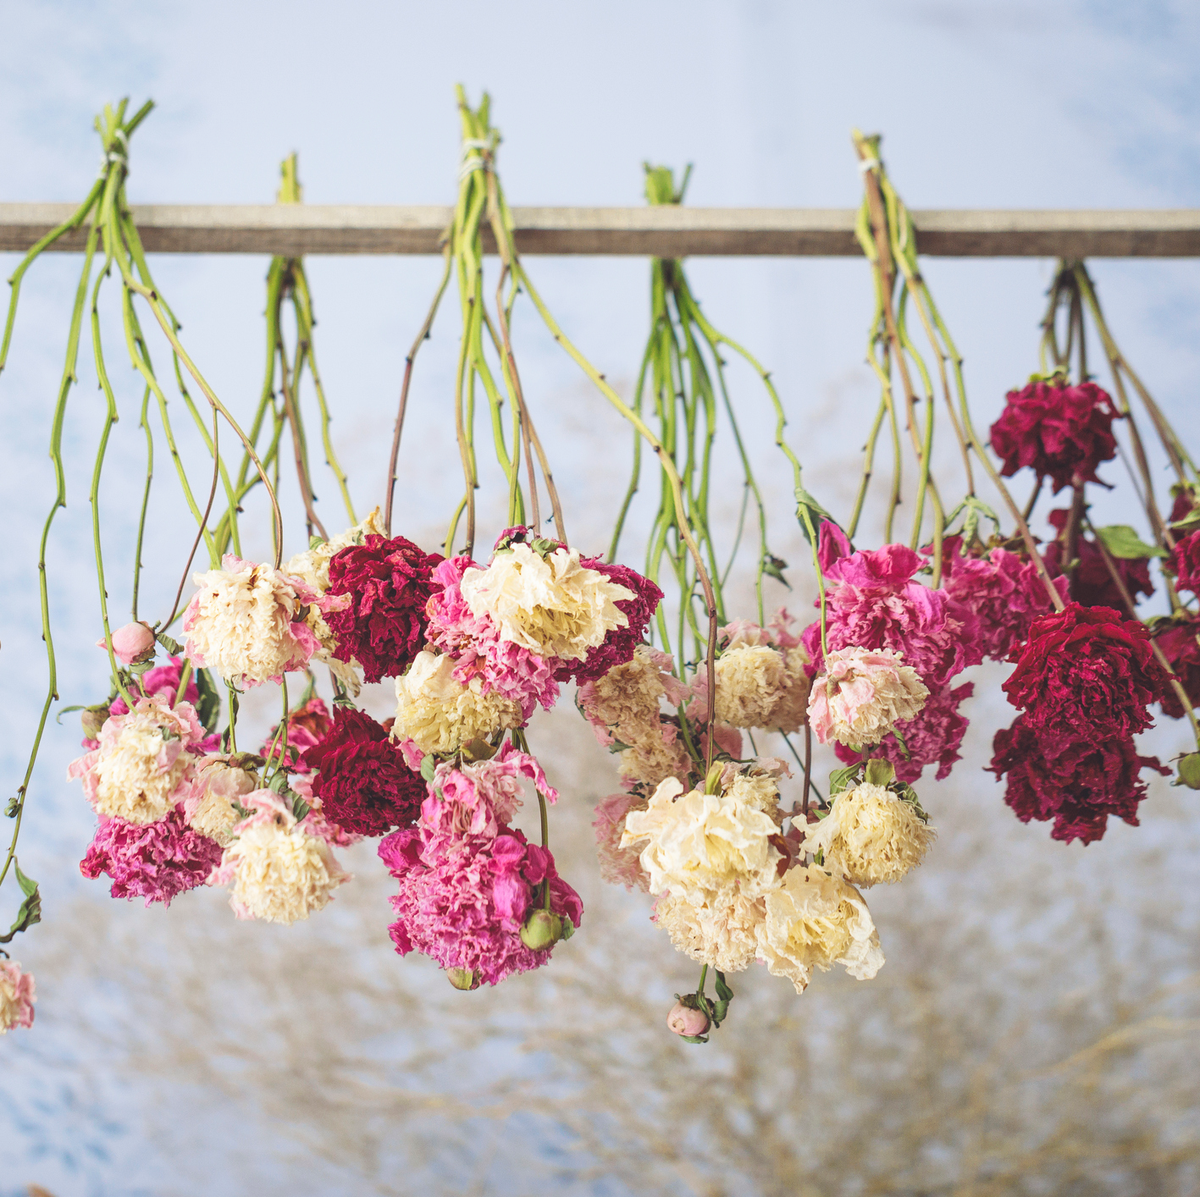 Drying Flowers with Silica GelCrystals + A Fun Way to Display Them